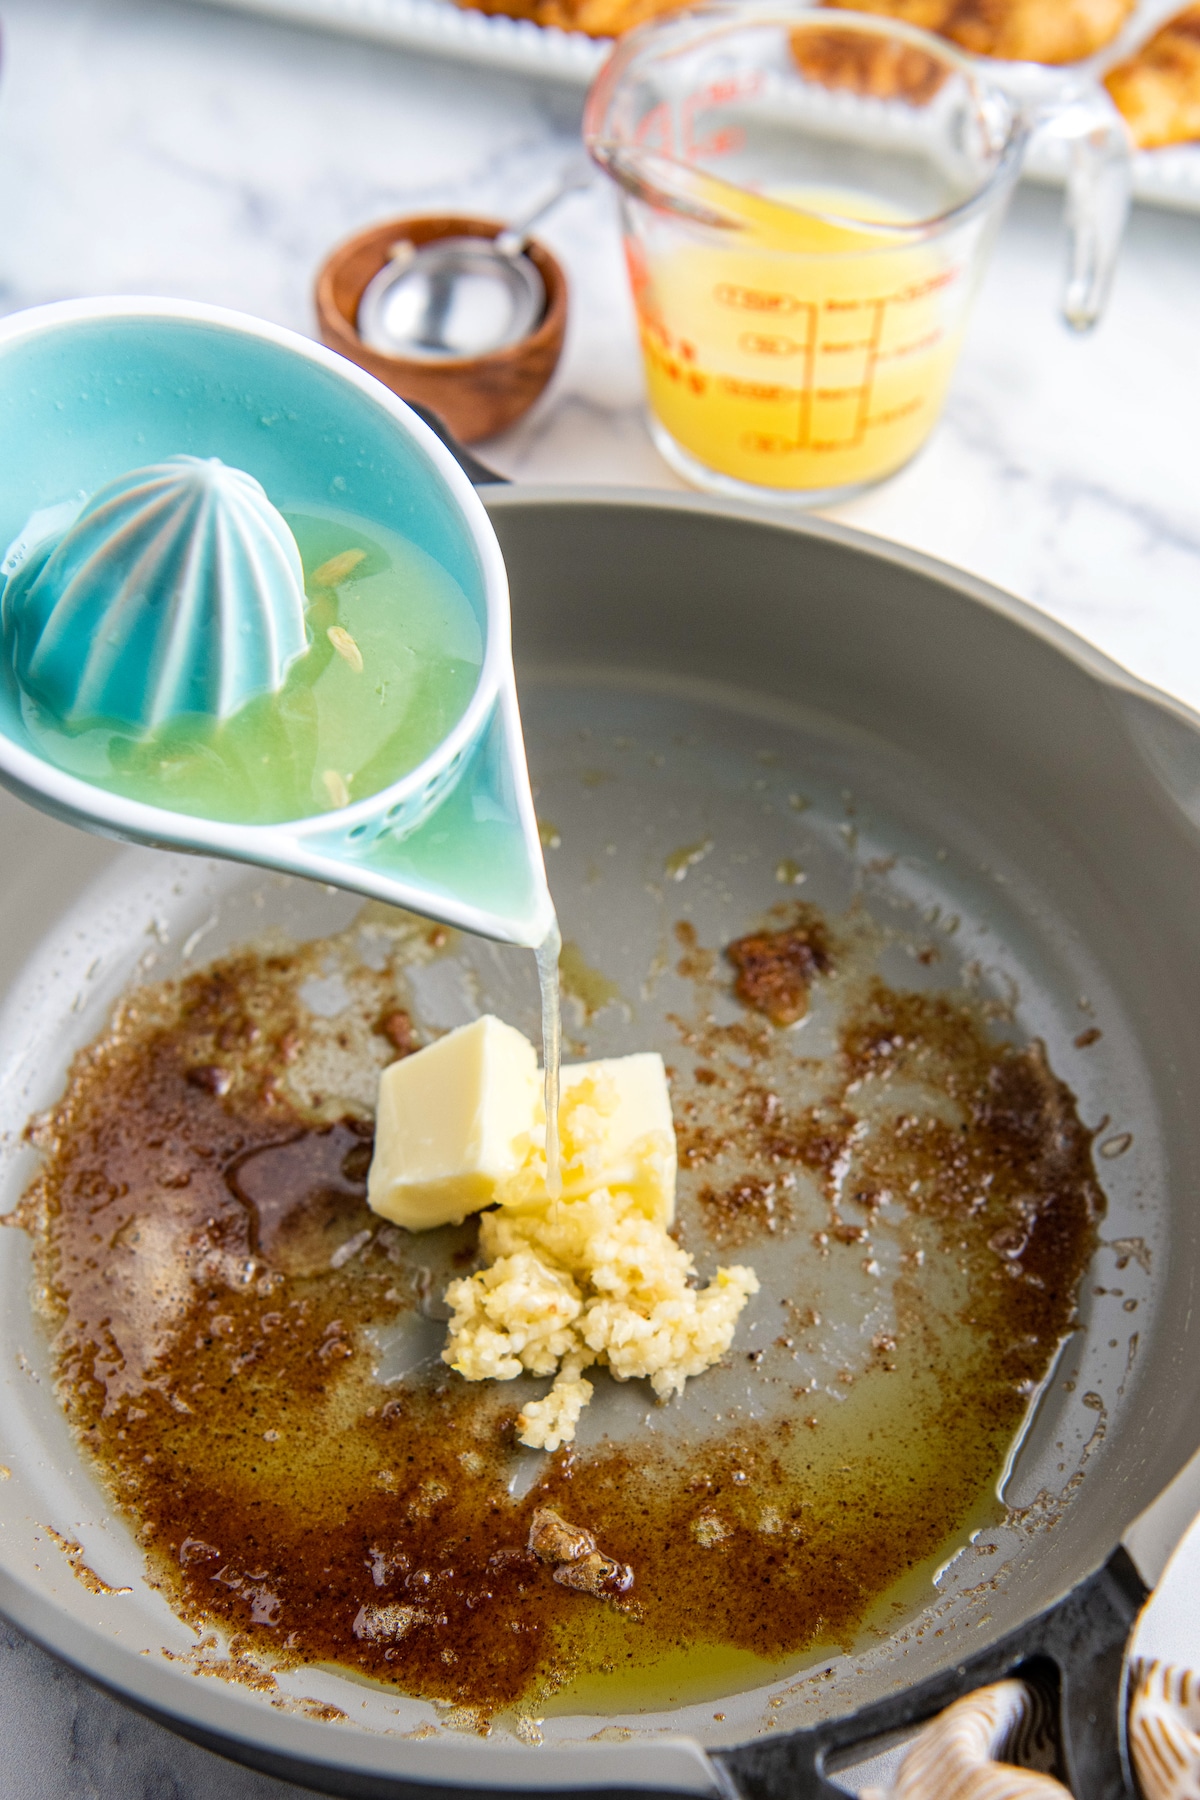 Butter, garlic in a skillet with lemon juice being poured on top.